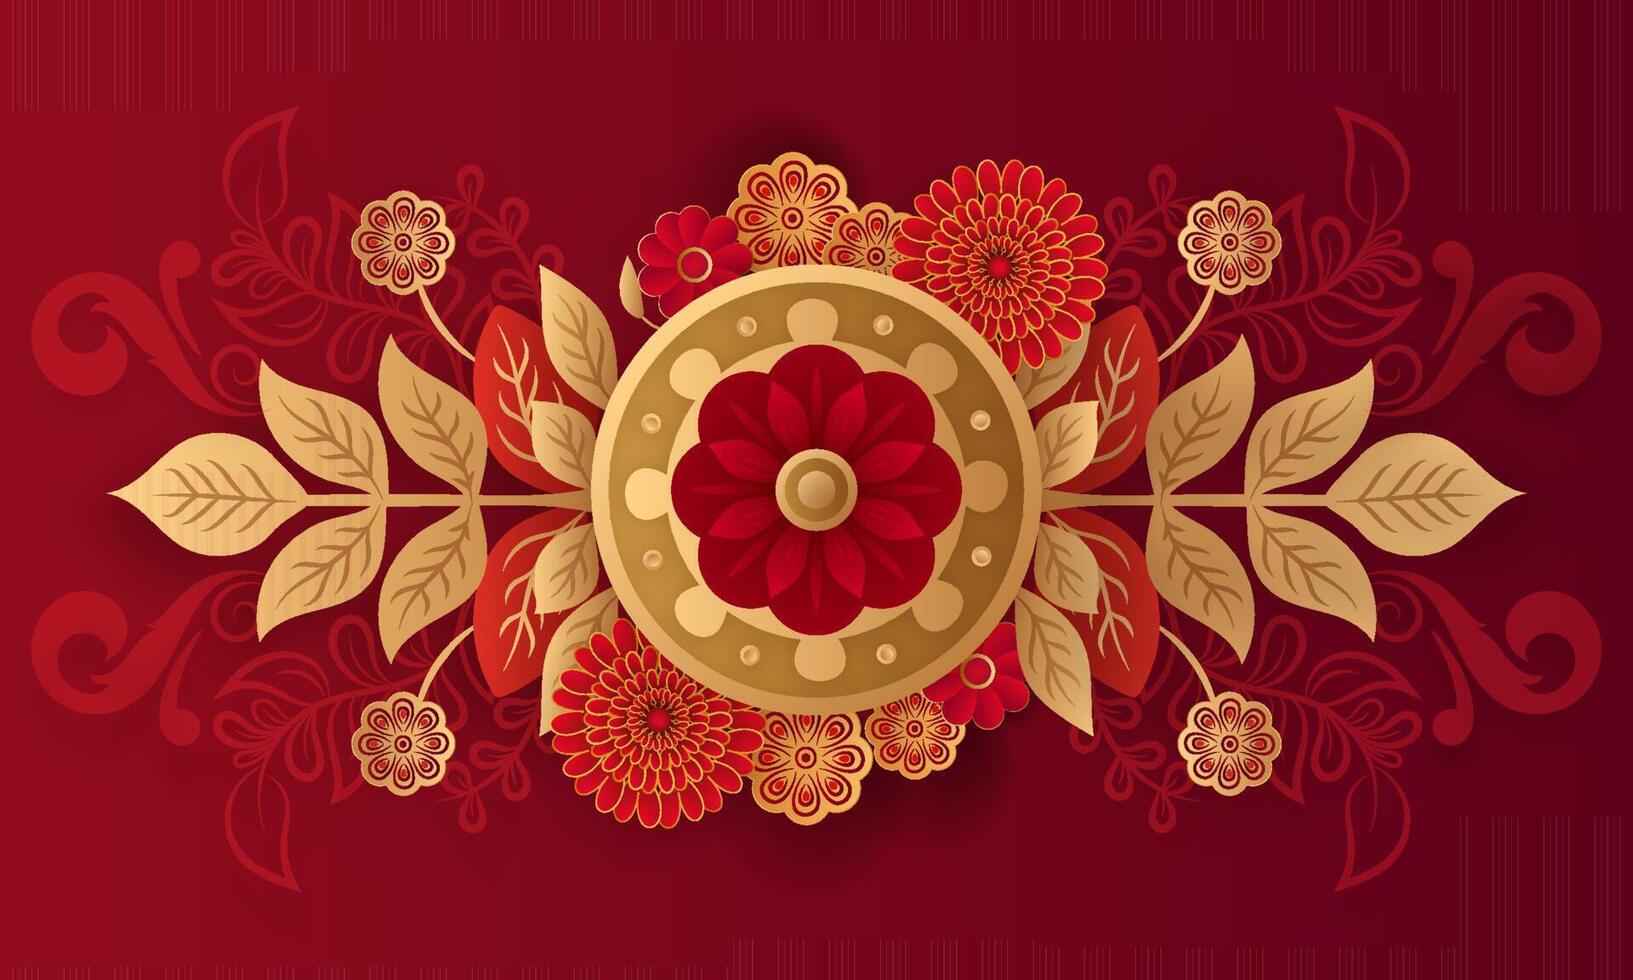 Red And Golden Volumetric Floral Horizontal Background or Greeting Card Design. Illustration. vector